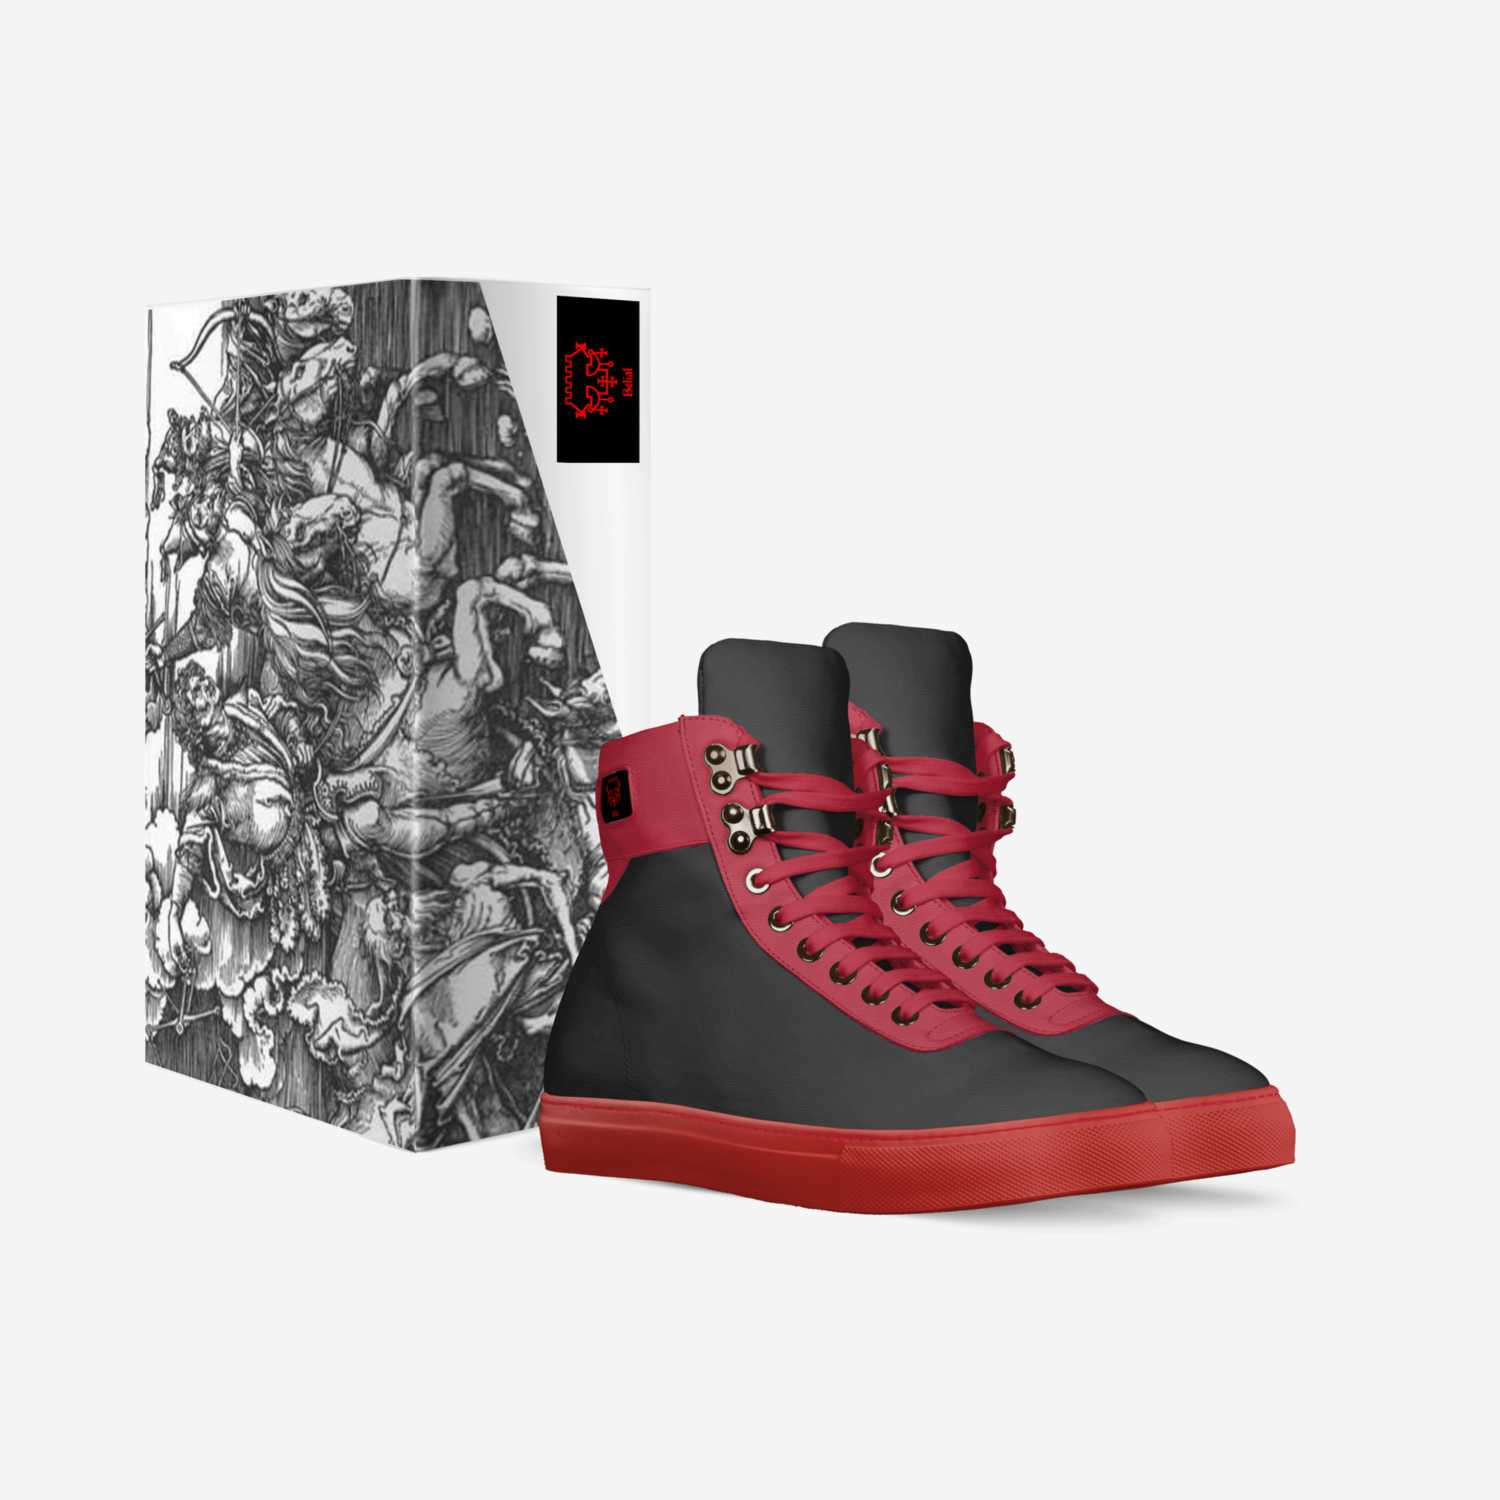 Belial custom made in Italy shoes by Jonathan Vasquez | Box view